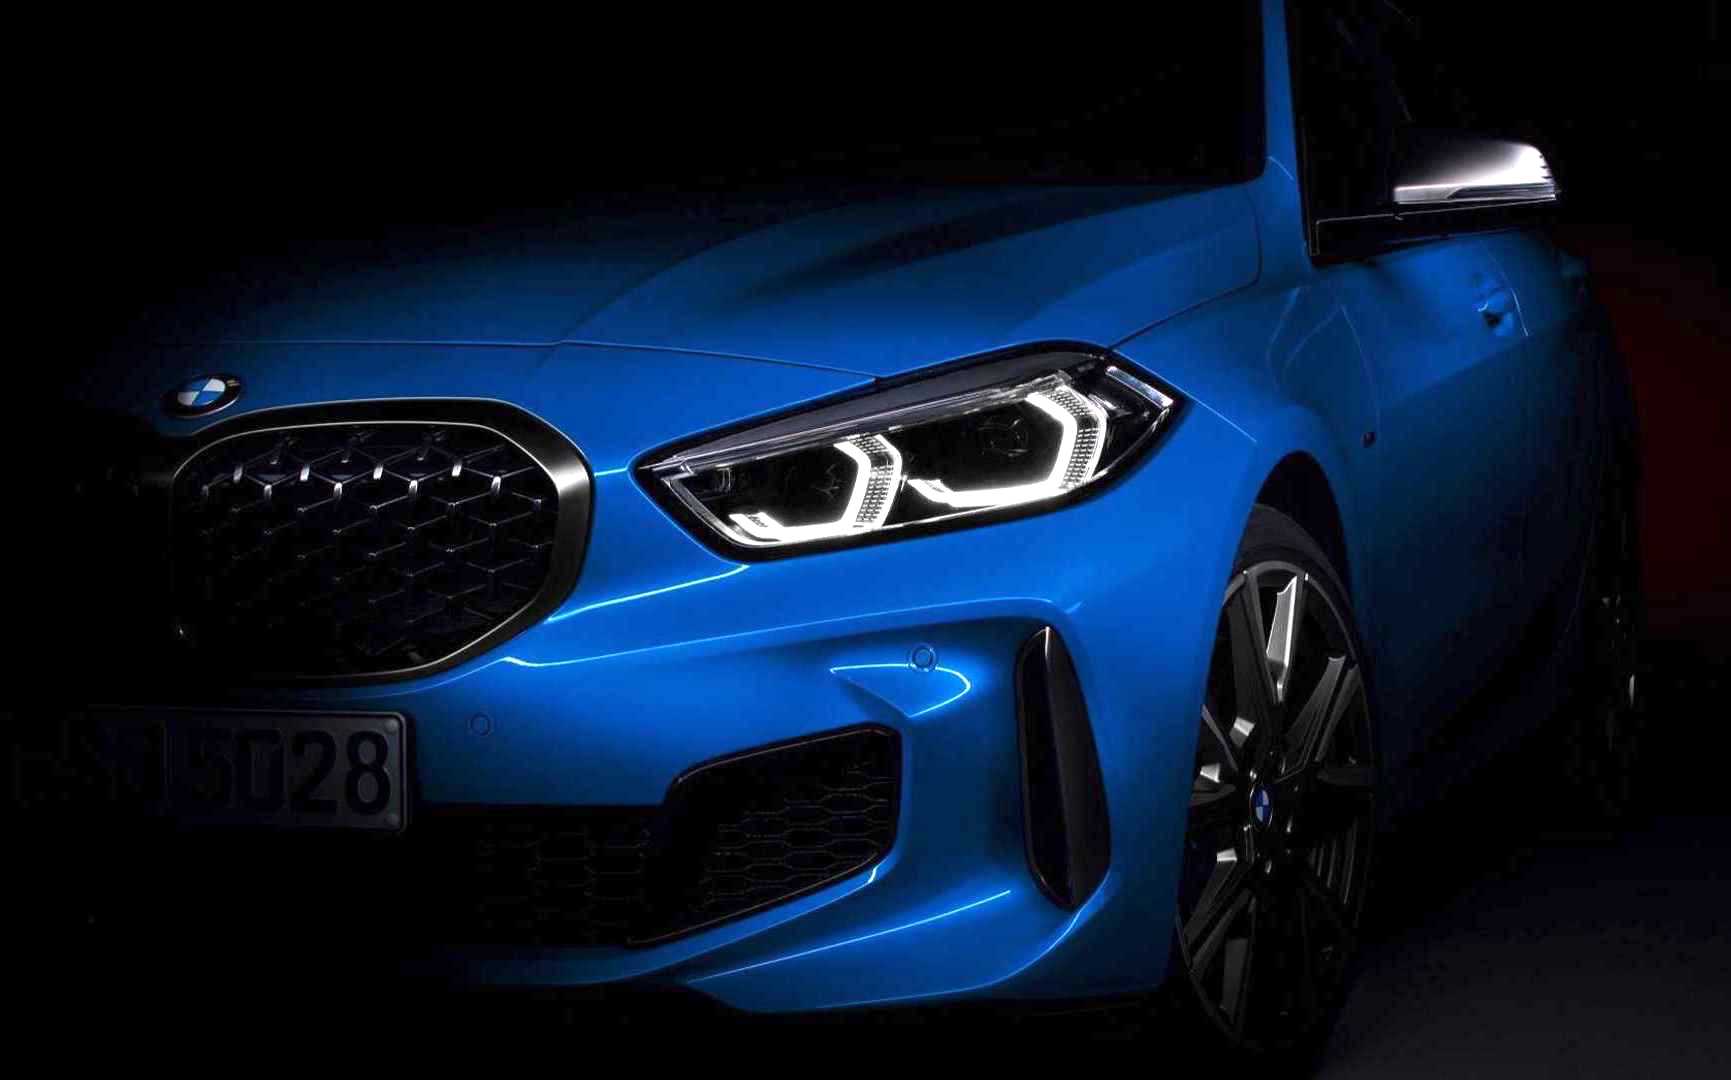 2020 BMW 1 Series previewed, with new M135i xDrive